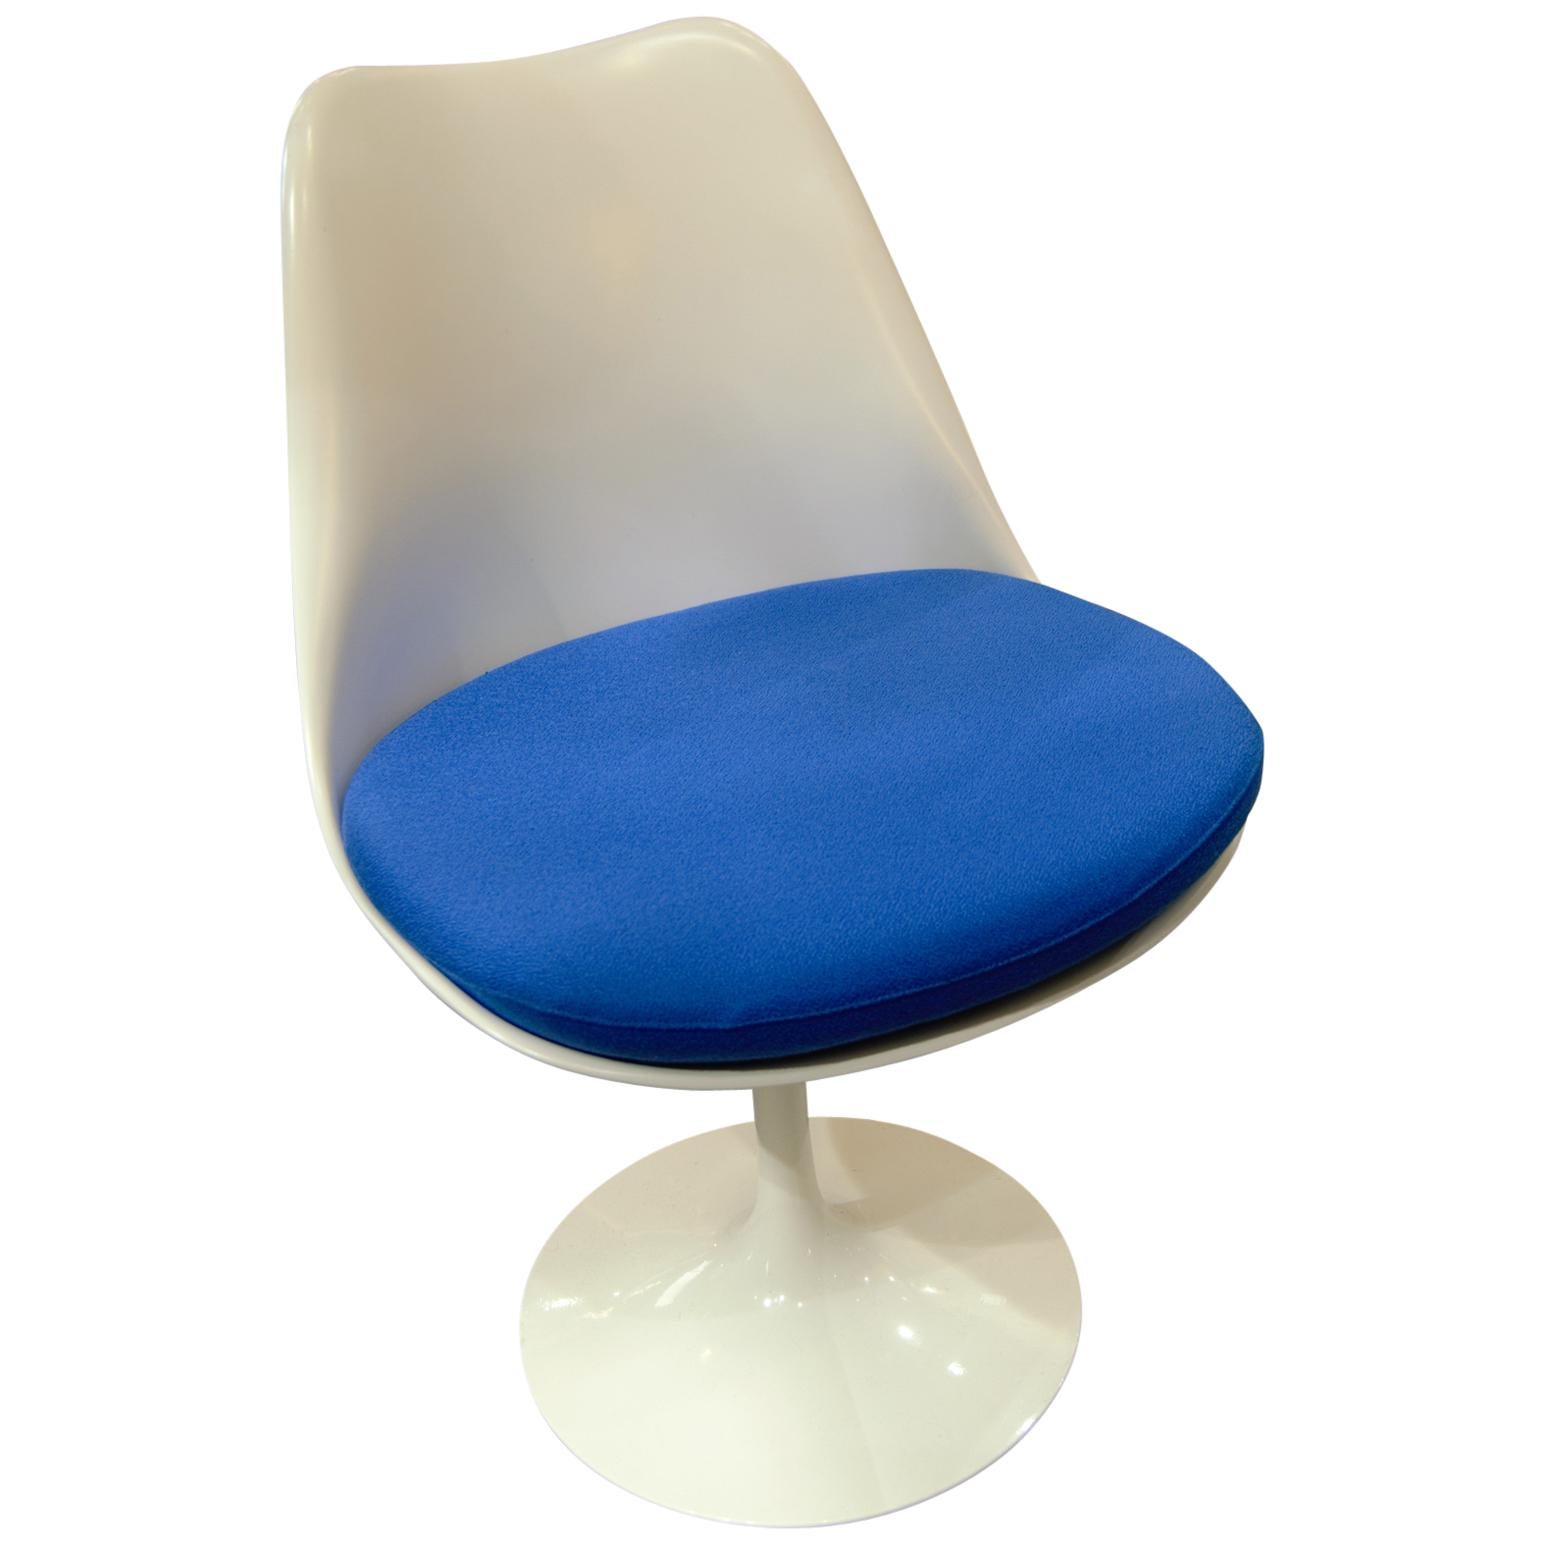 Eero Saarinen (1910-1961) and Knoll International
The tulip chair was designed by Eero Saarinen in 1955-1956 for the Knoll Company of New York City.

Chaise modèle Tulipe
Chair model tulip - Knoll 

Coque en fibre de verre laquée blanc,